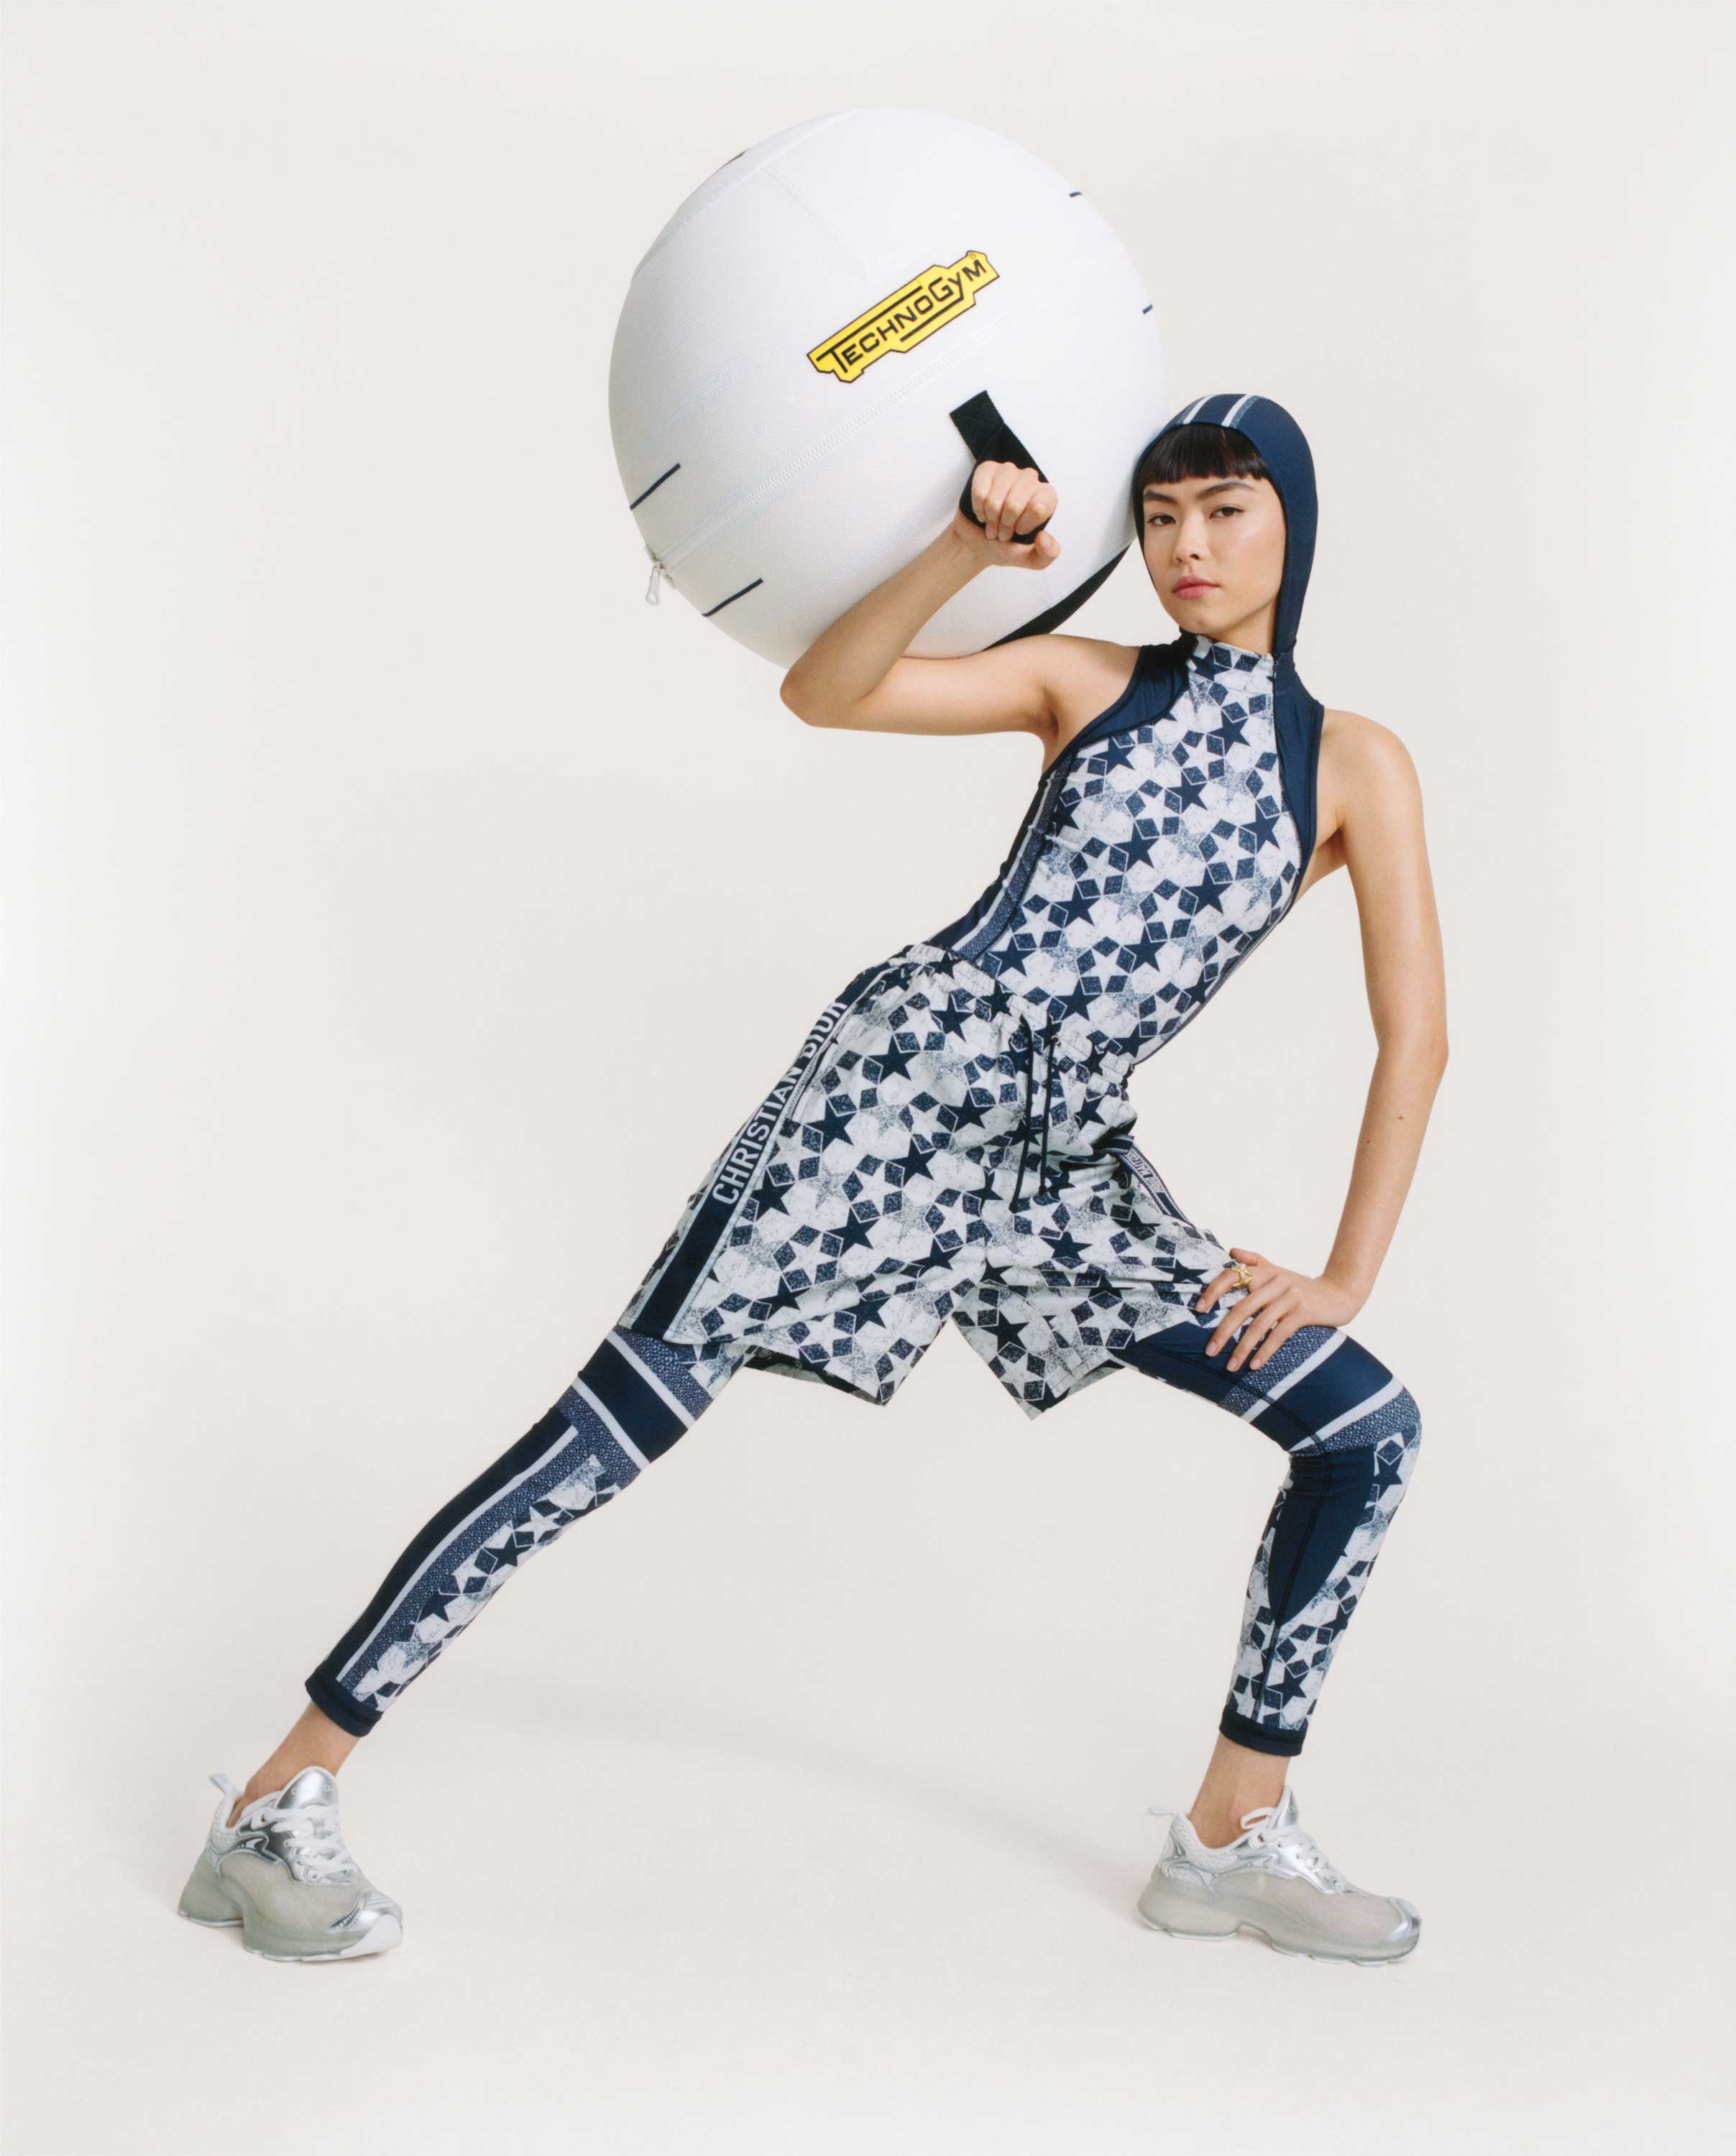 Dior teams up with Technogym for an equipment line that's fit and